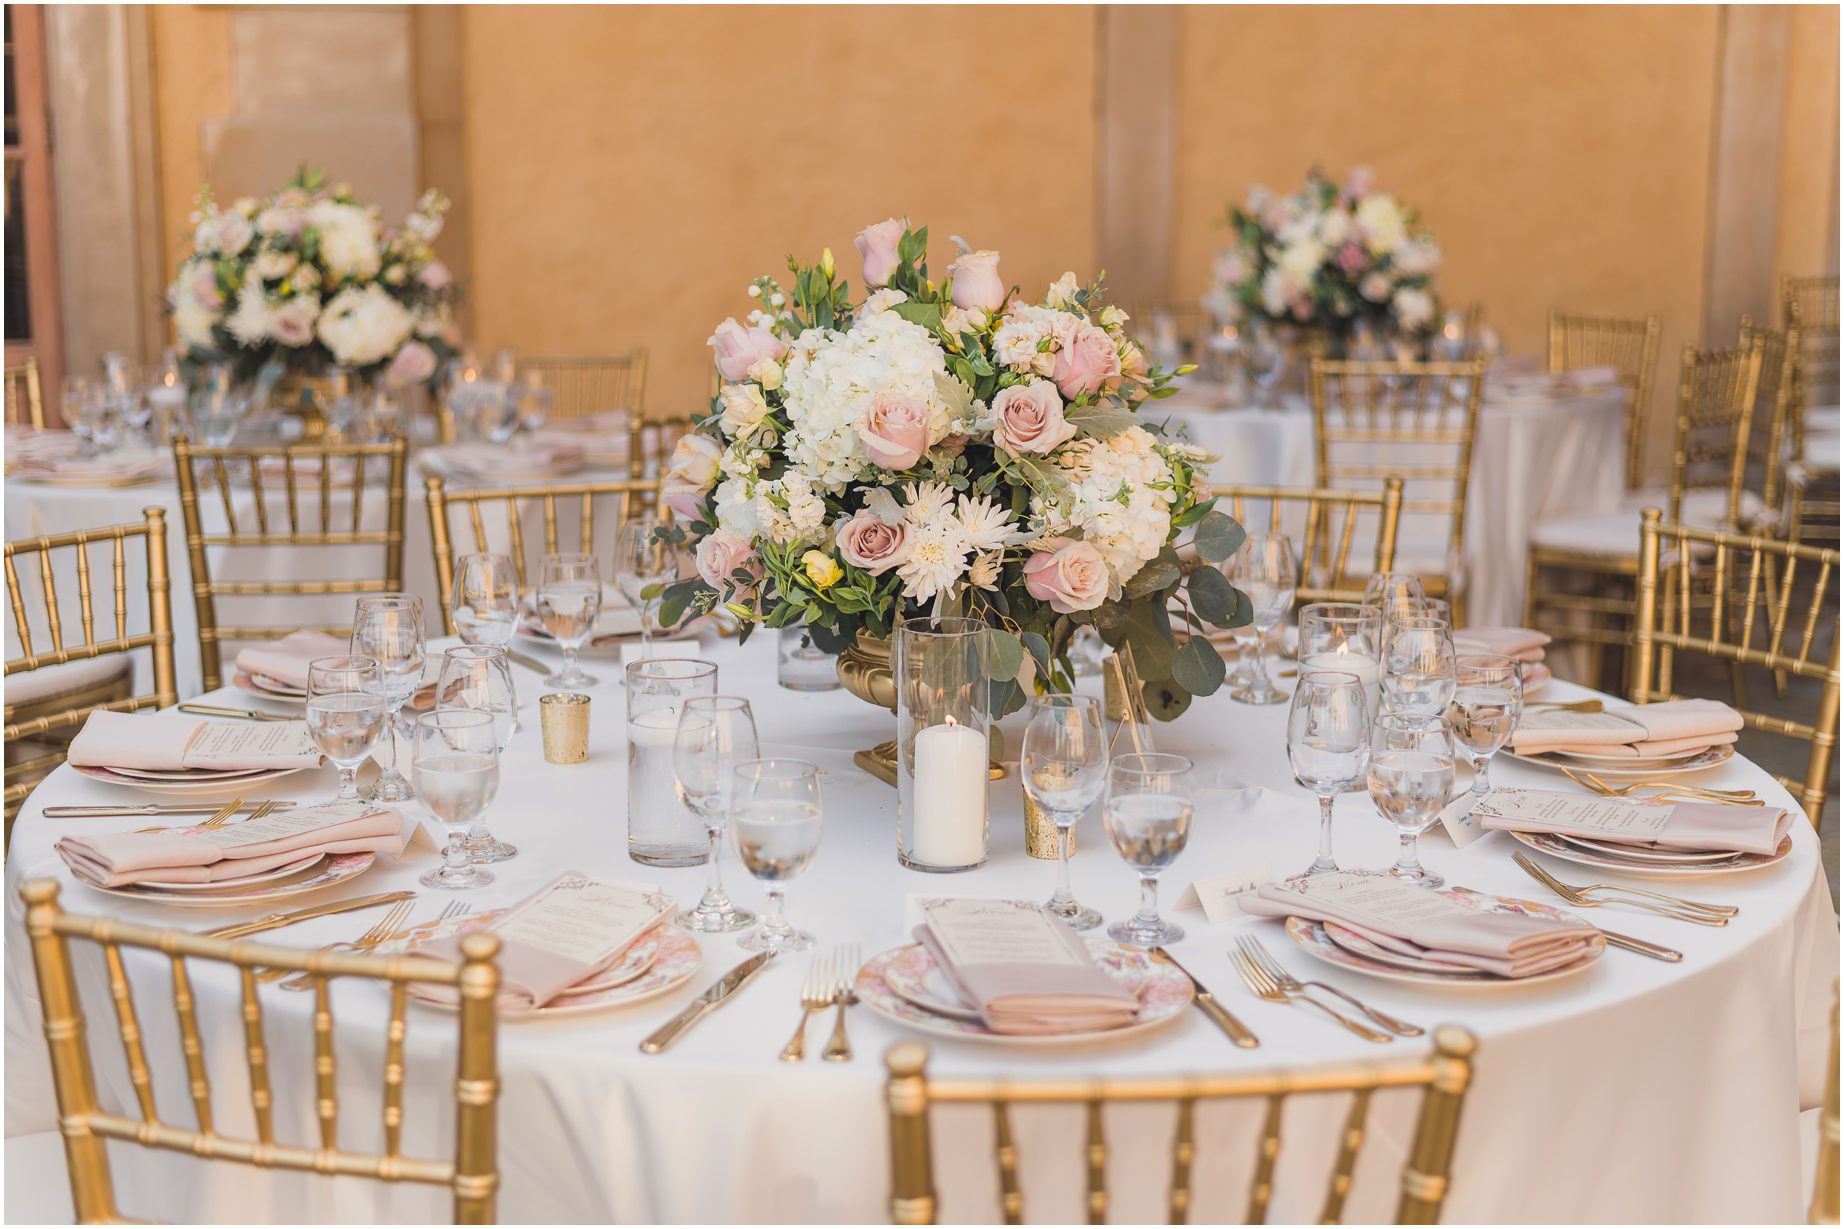 Table setup for a whimsical wedding at Villa del sol d'Oro featuring pink roses, white hydrangeas, and daisies.